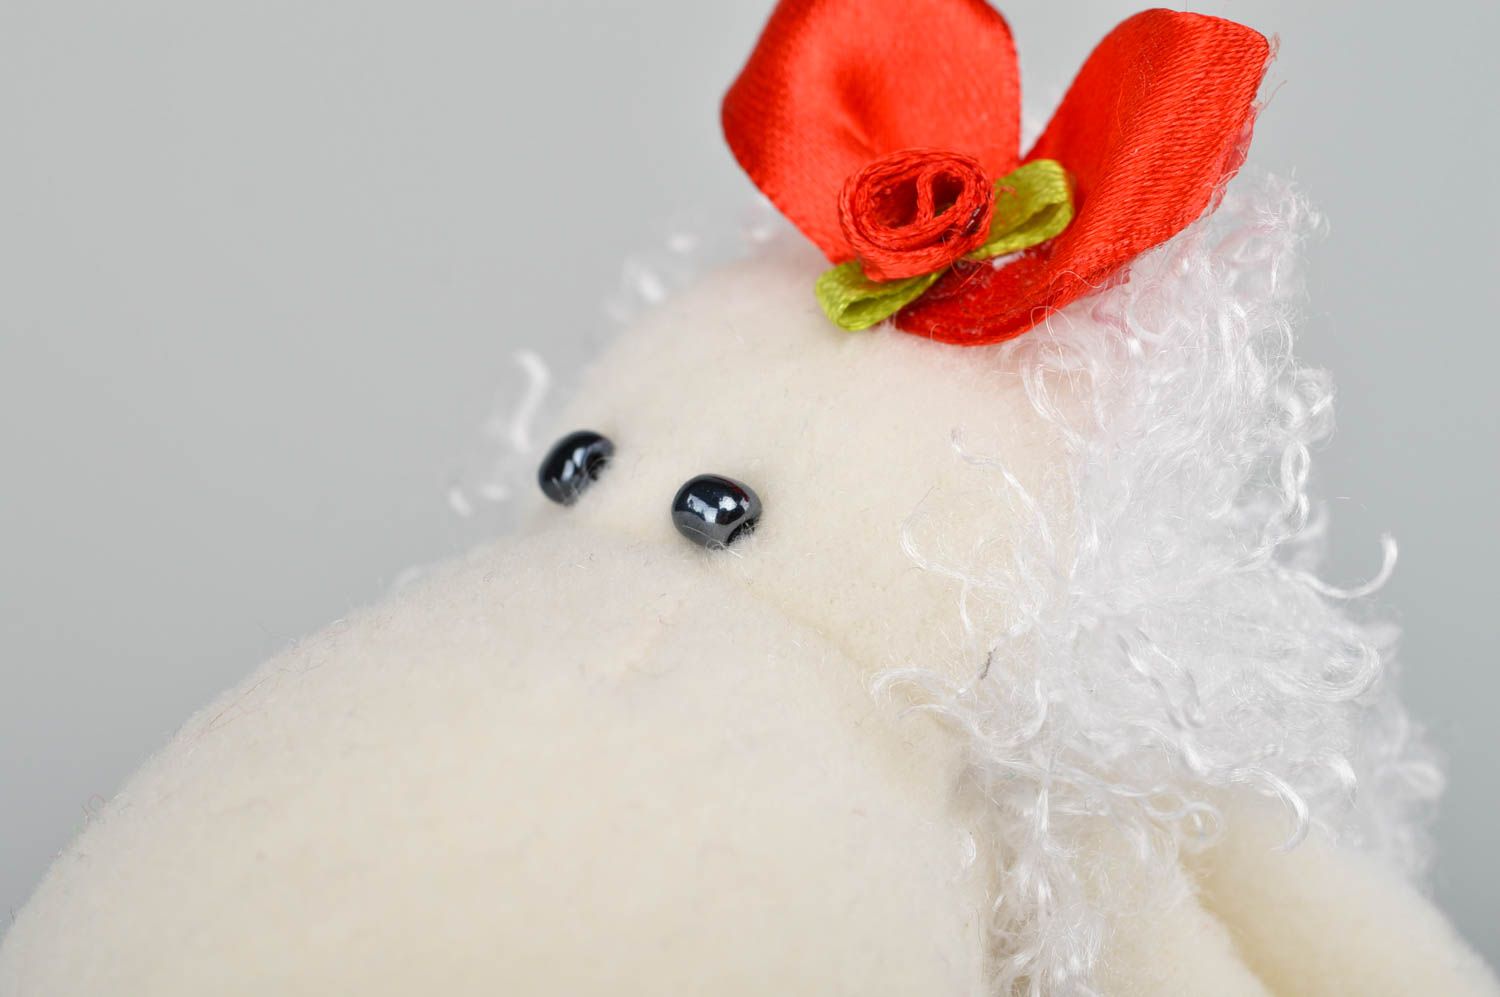 Unusual handmade stuffed toy soft toy cool rooms gift ideas decorative use only photo 4